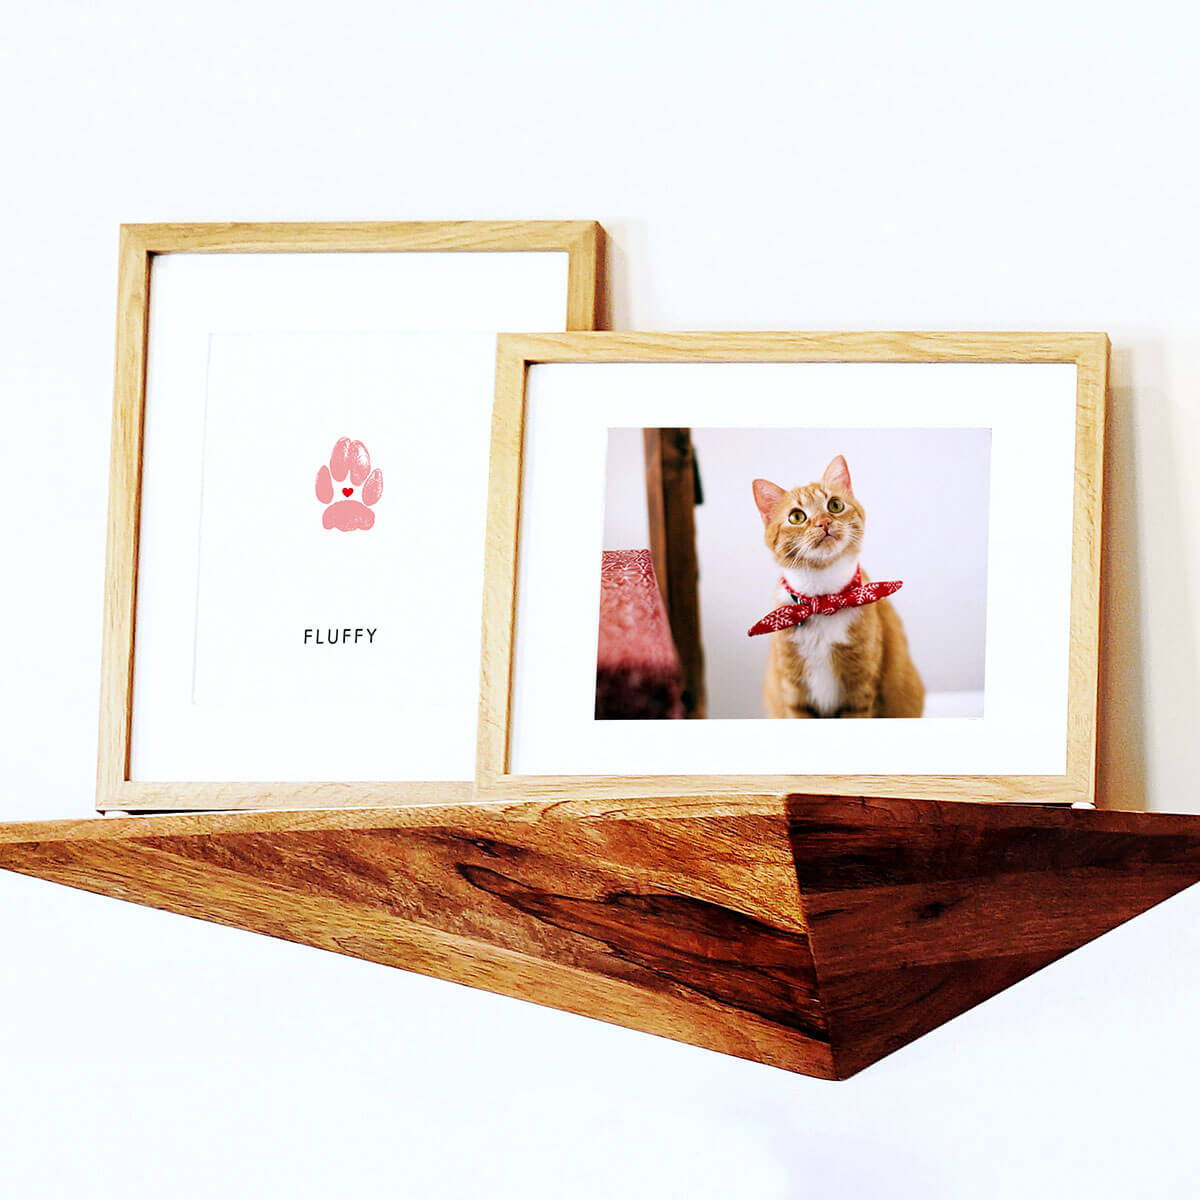 cats paw print in frame on shelf with framed picutre of cat